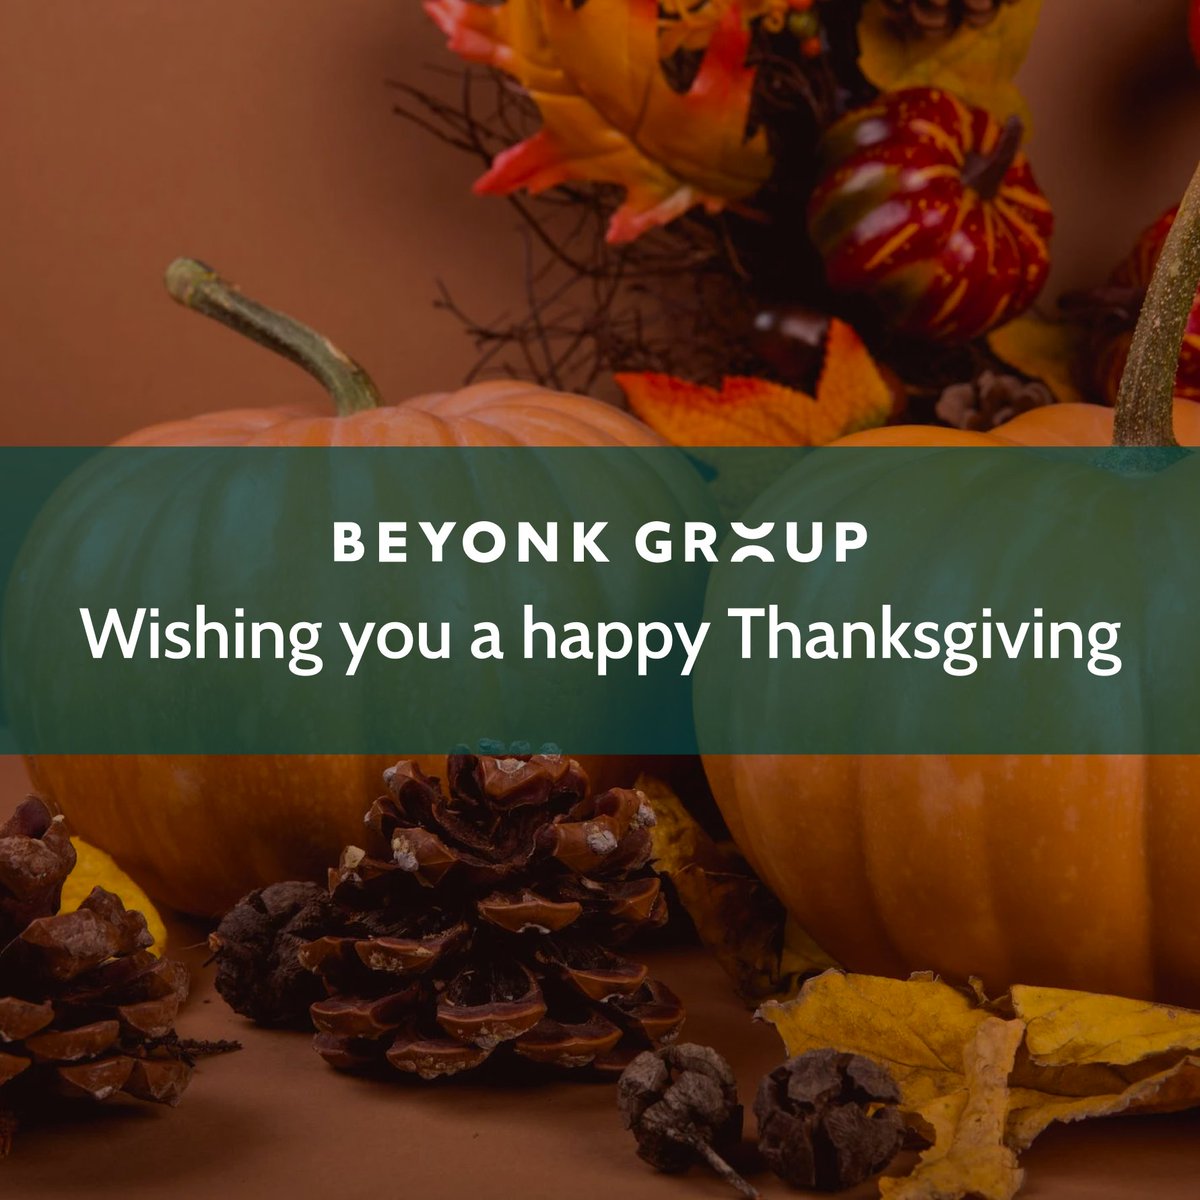 🍁🦃 Wishing everyone a happy Thanksgiving! 🍂🌽 We've seen tremendous growth in the US over the past few months. A big thank you to our fantastic US team and a happy Thanksgiving to all who celebrate! #BeyonkGroup #Beyonk #BookingHound #HappyThanksgiving #Thanksgiving